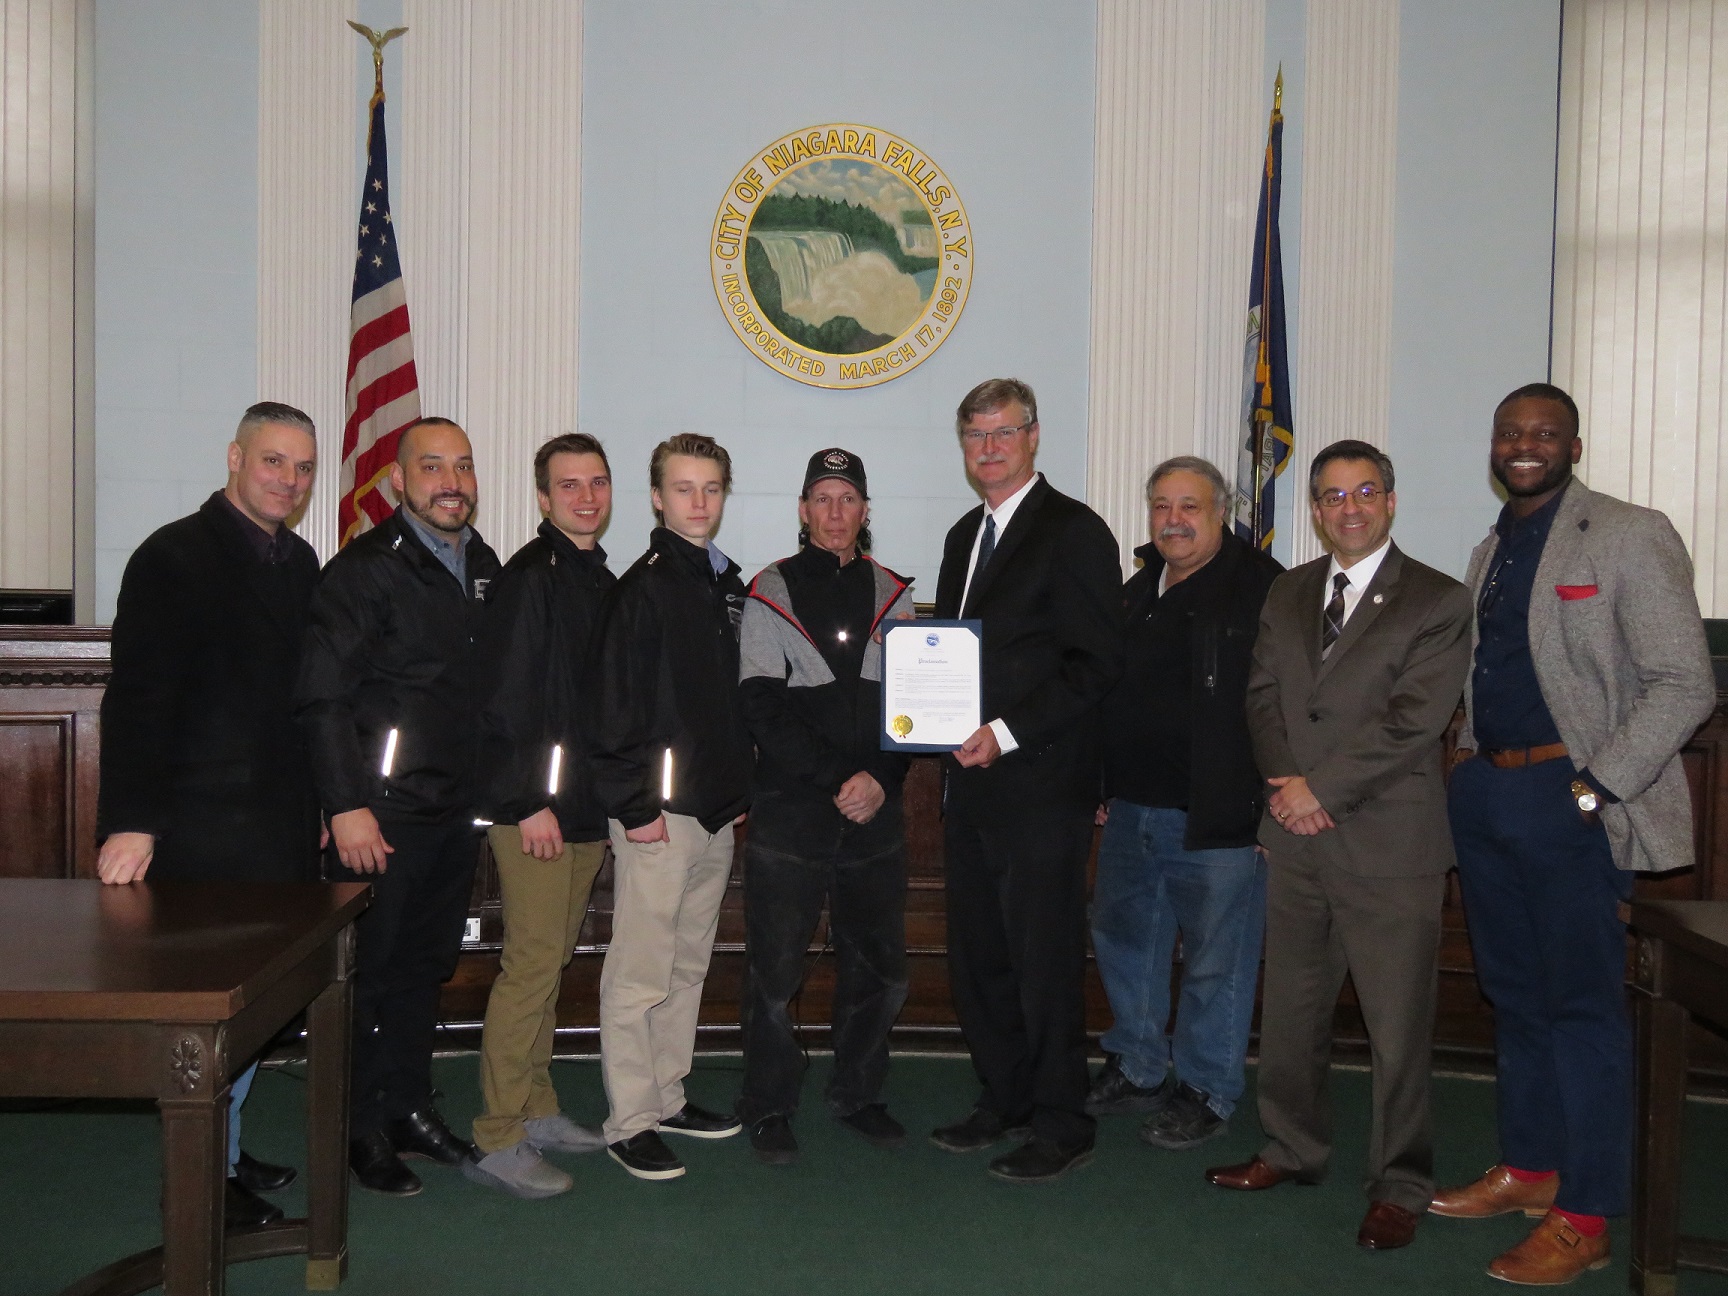 Representatives from the Niagara Falls Powerhawks and the City of Niagara Falls pose for a photo after the Powerhawks were issued a proclamation for their success in the 2017-18 season. From left: Niagara Falls Councilman Bill Kennedy, Powerhawks coach Jason Hill, Powerhawks captain Andrew Logar, Powerhawks defensman Matt Cavanaugh, Powerhawks Owner Steve Bueme, Niagara Falls Mayor Paul Dyster, Facility Operator Gene Carella, and Niagara Falls Councilmen Andy Touma and Ezra Scott. (Photo by David Yarger)